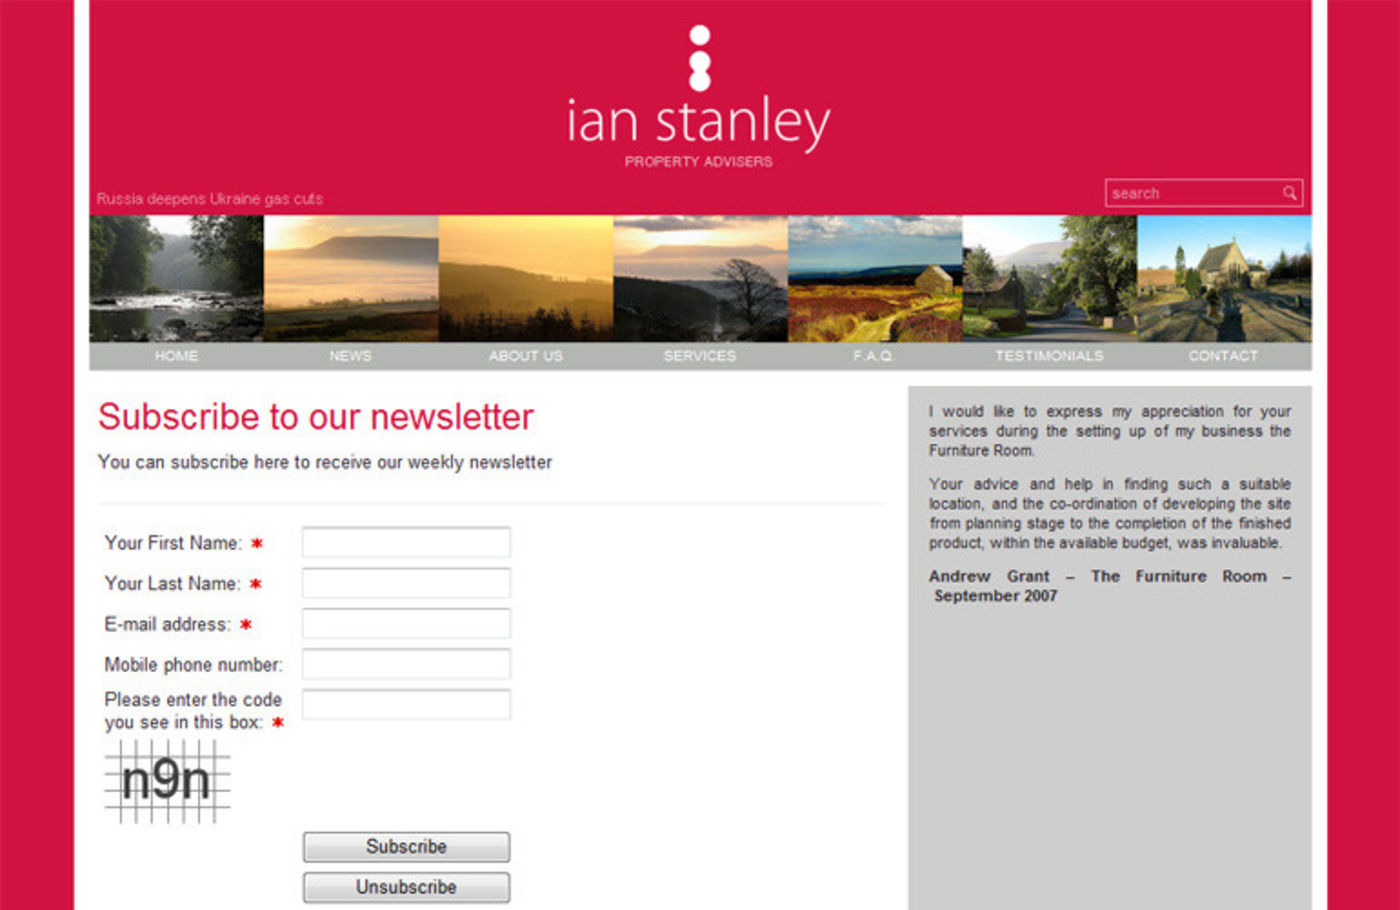 Ian Stanley Property Advisers Form:- Subscribe to our newsletter